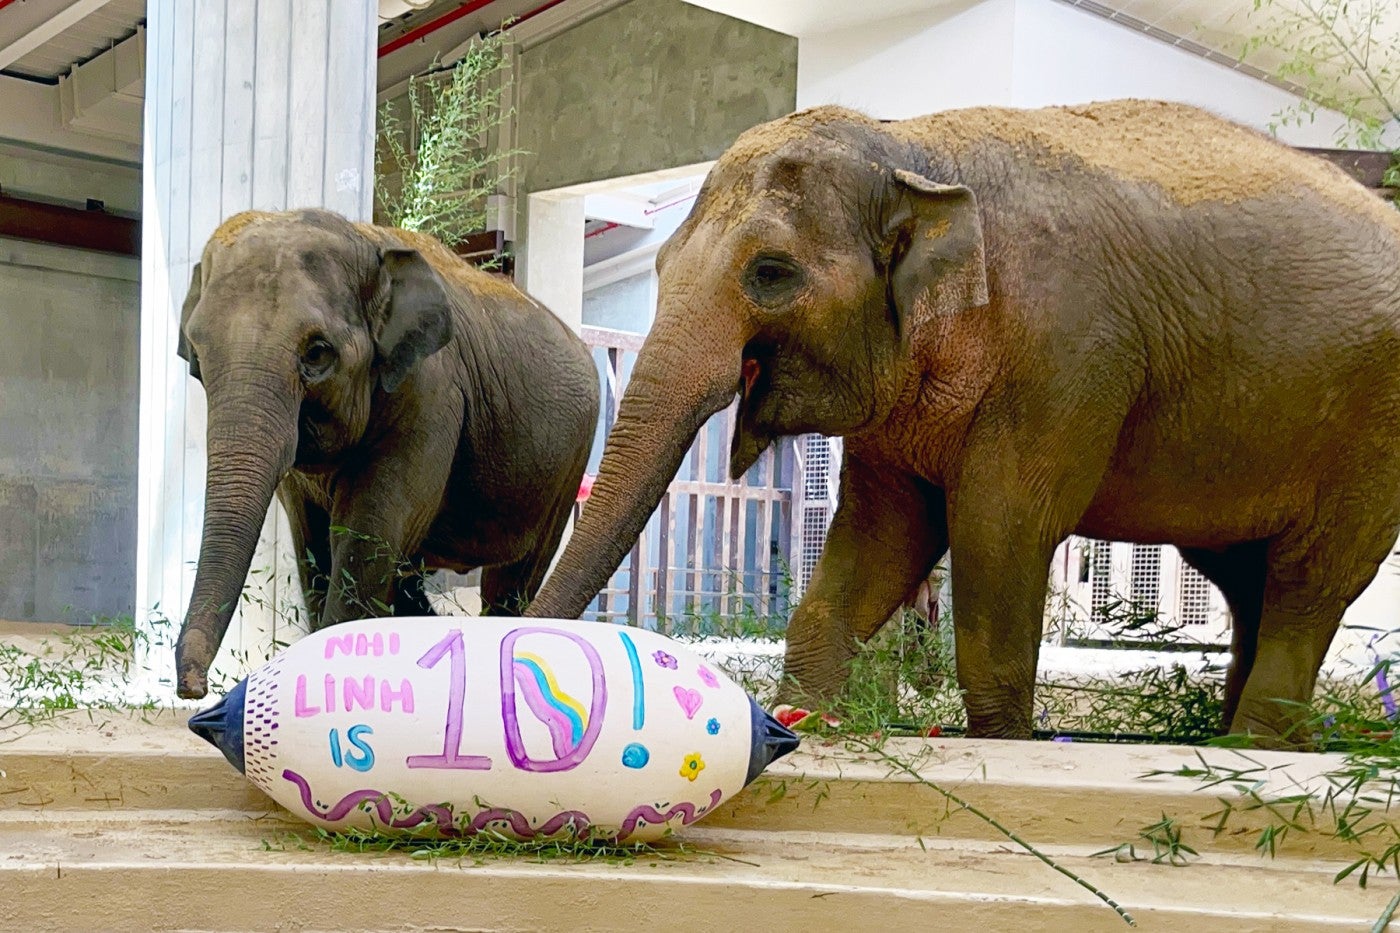 Asian elephants Nhi Linh (left) and Trong Nhi celebrate Nhi Linh's 10th birthday. Keepers decorated Nhi Linh's favorite toy: a buoy! 